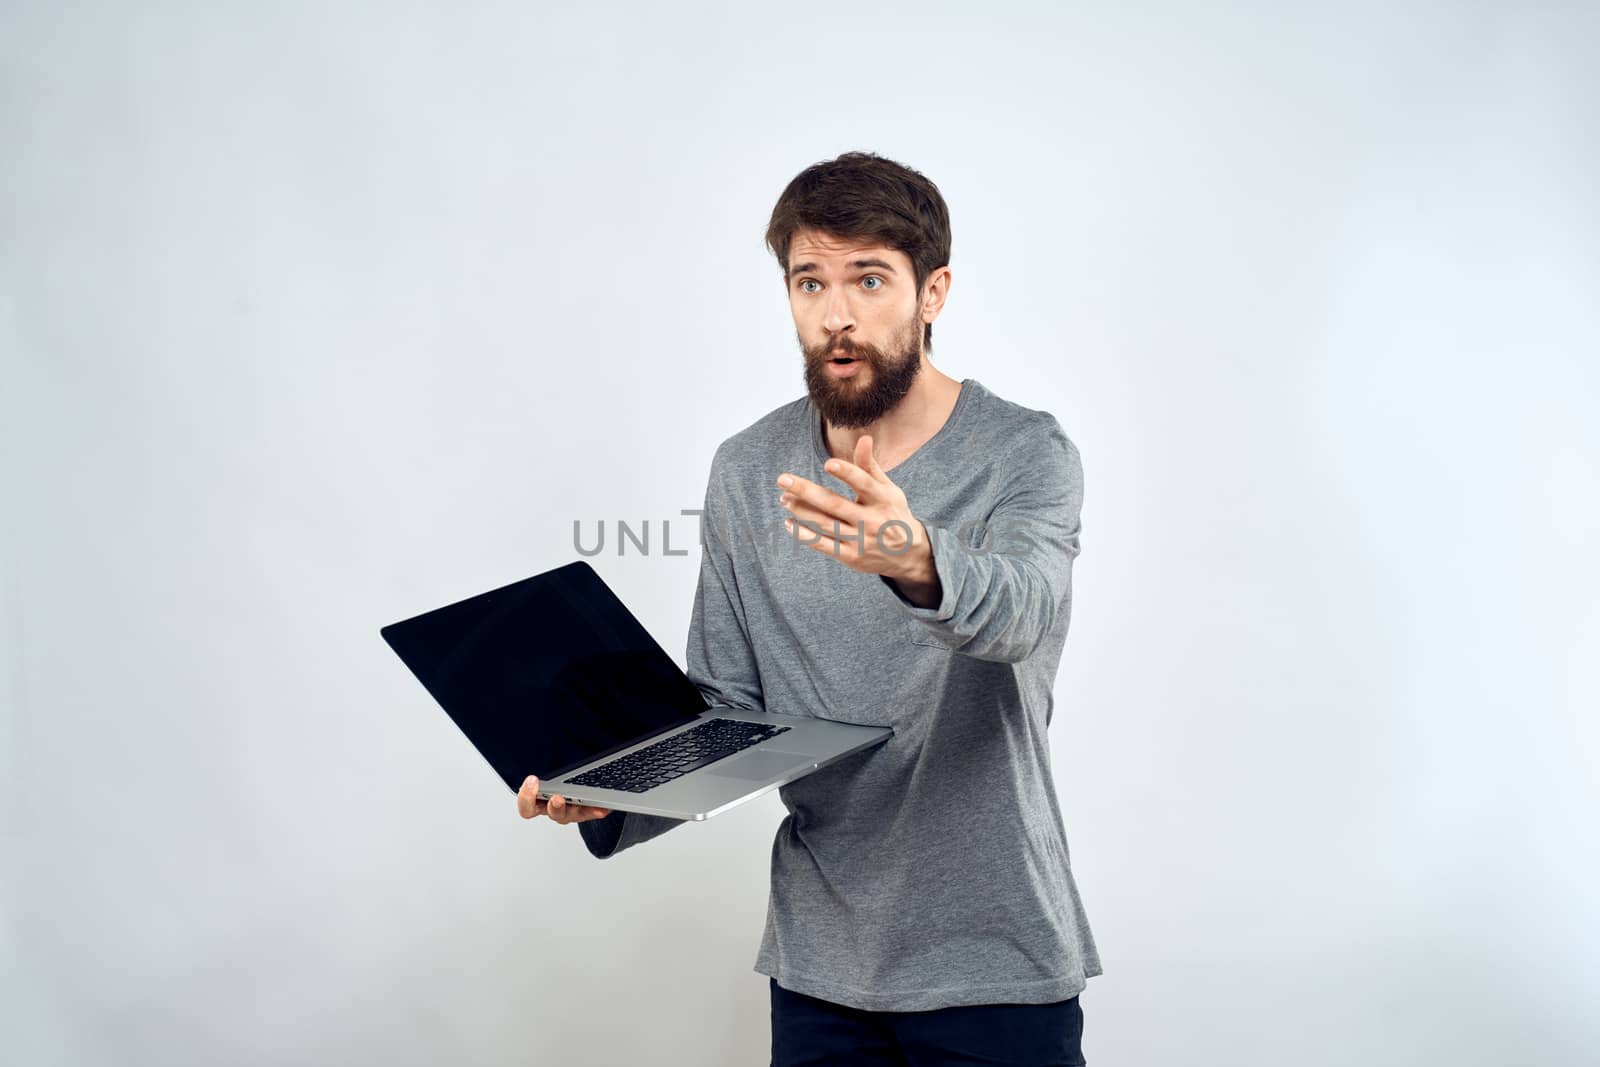 A man in a gray sweater with a laptop hands lifestyle technology communication internet work. High quality photo